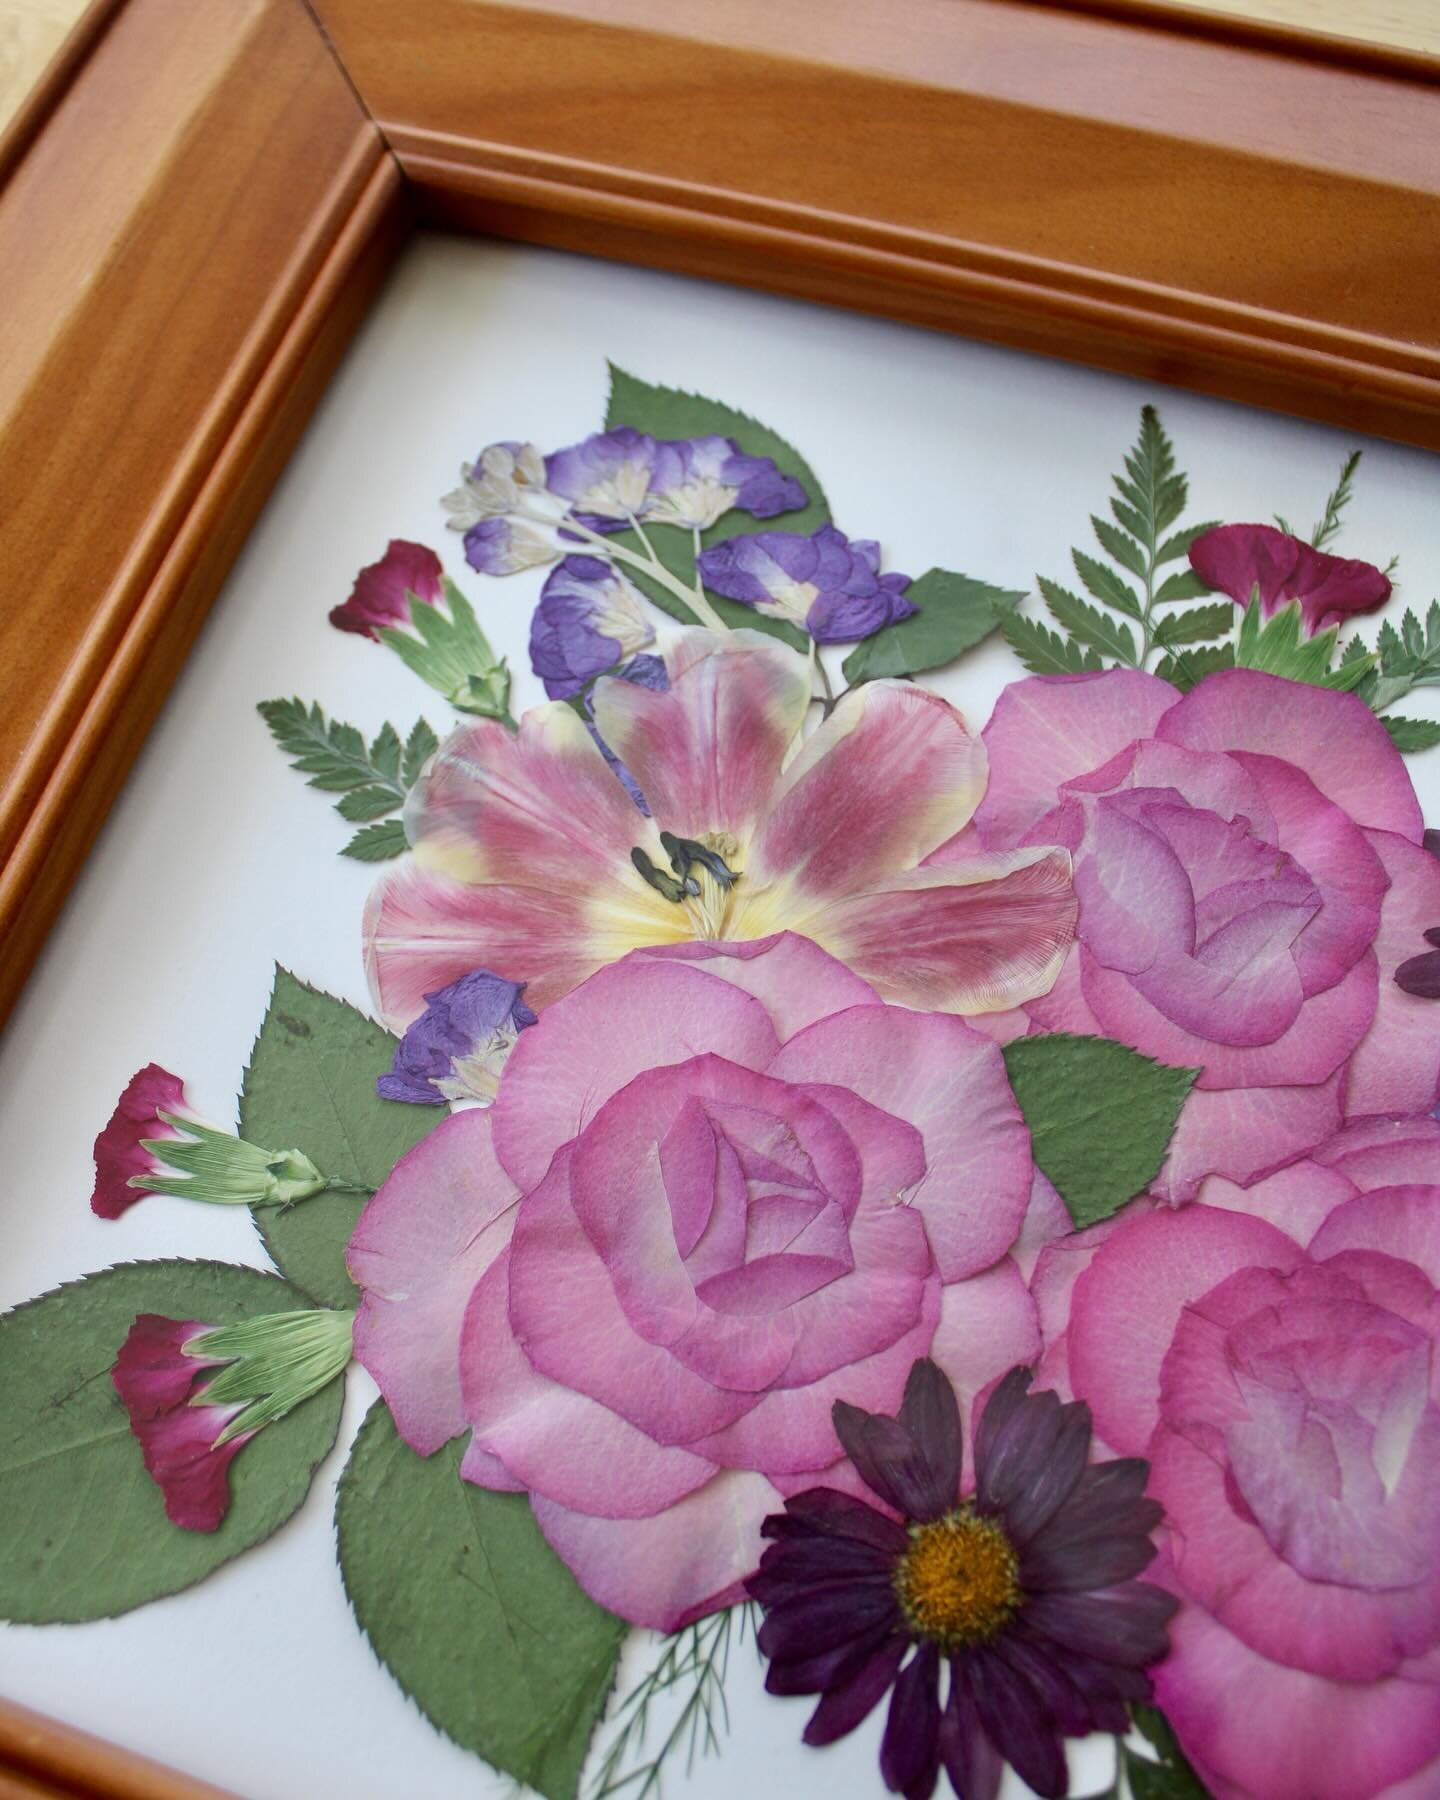 This solid wood frame was the perfect thrift find, so we had to use it for their flowers!🌺 

#memorialflowers #flowerpreservation #pressedflowers #driedflowers #pressedflowerframes